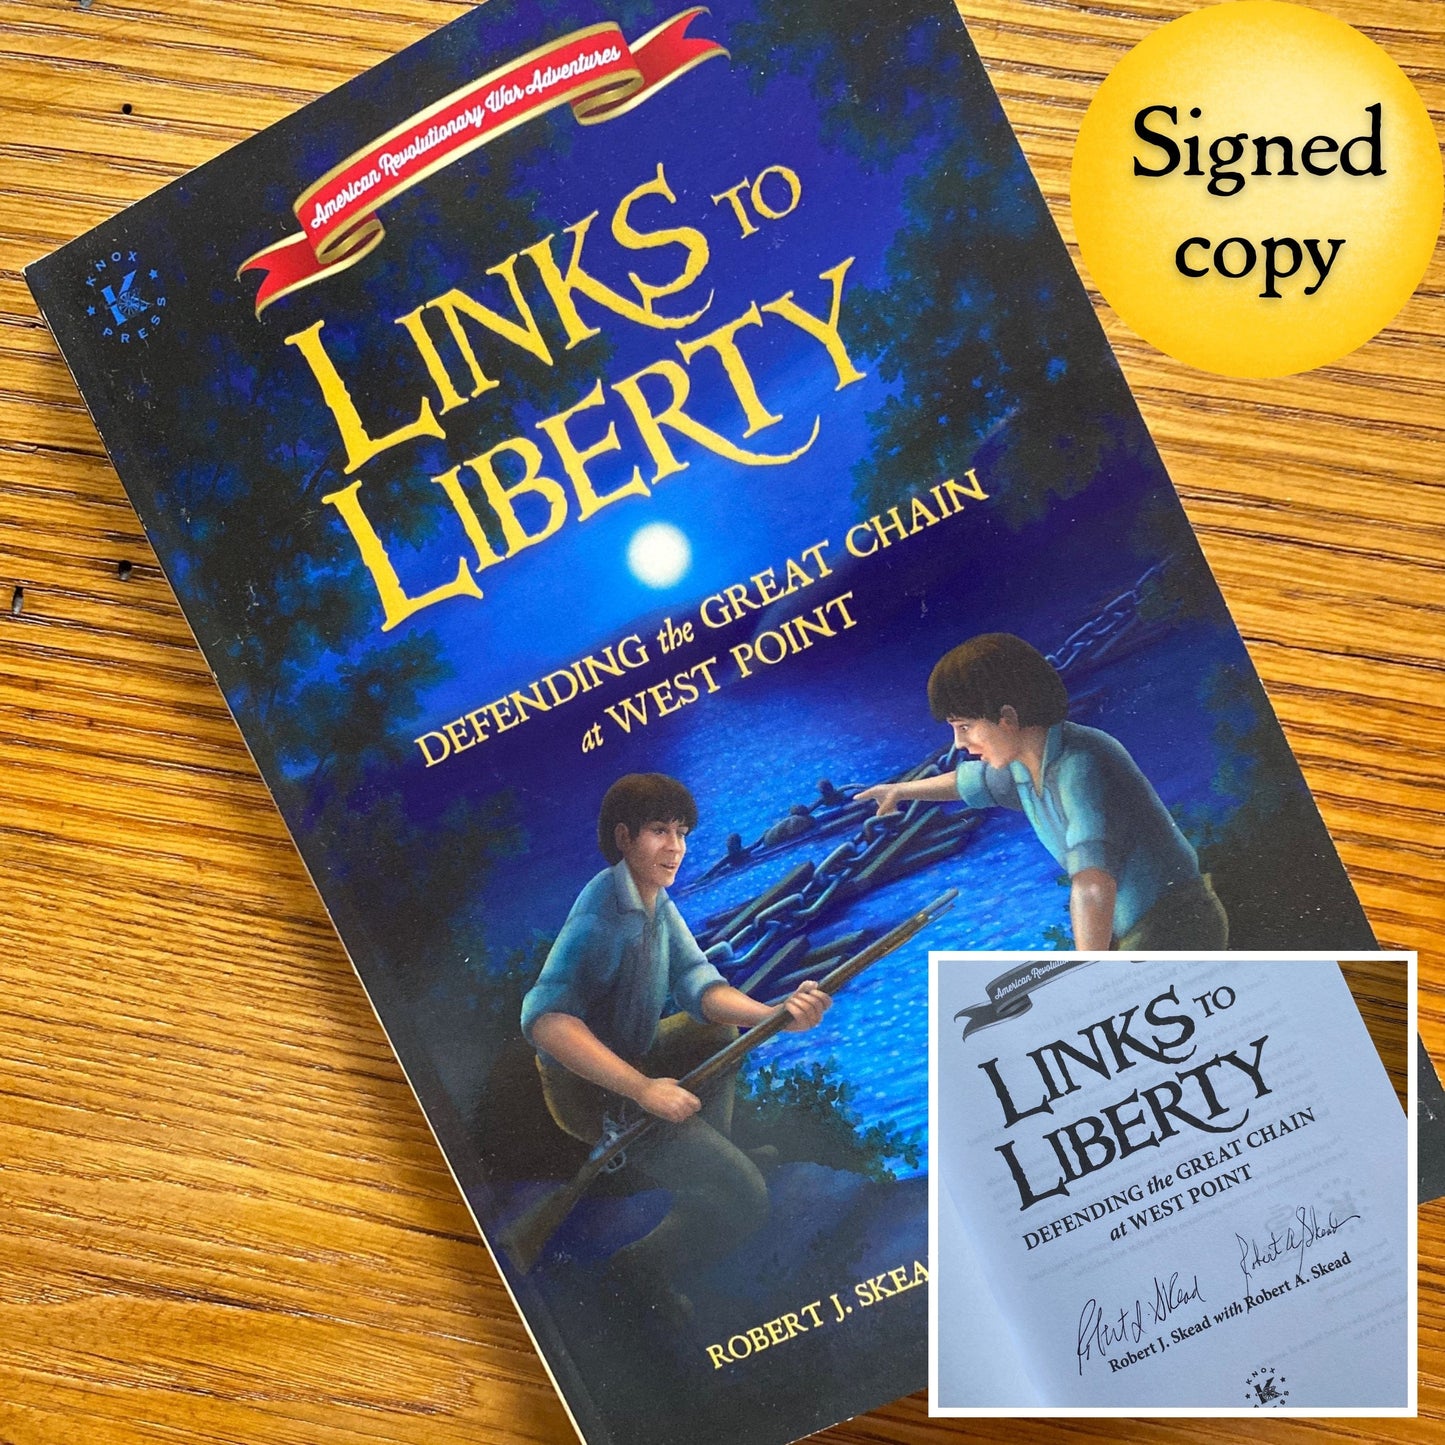 "Links to Liberty: Defending the Great Chain at West Point" - Signed by the Authors, Robert J. Skead and Robert A. Skead